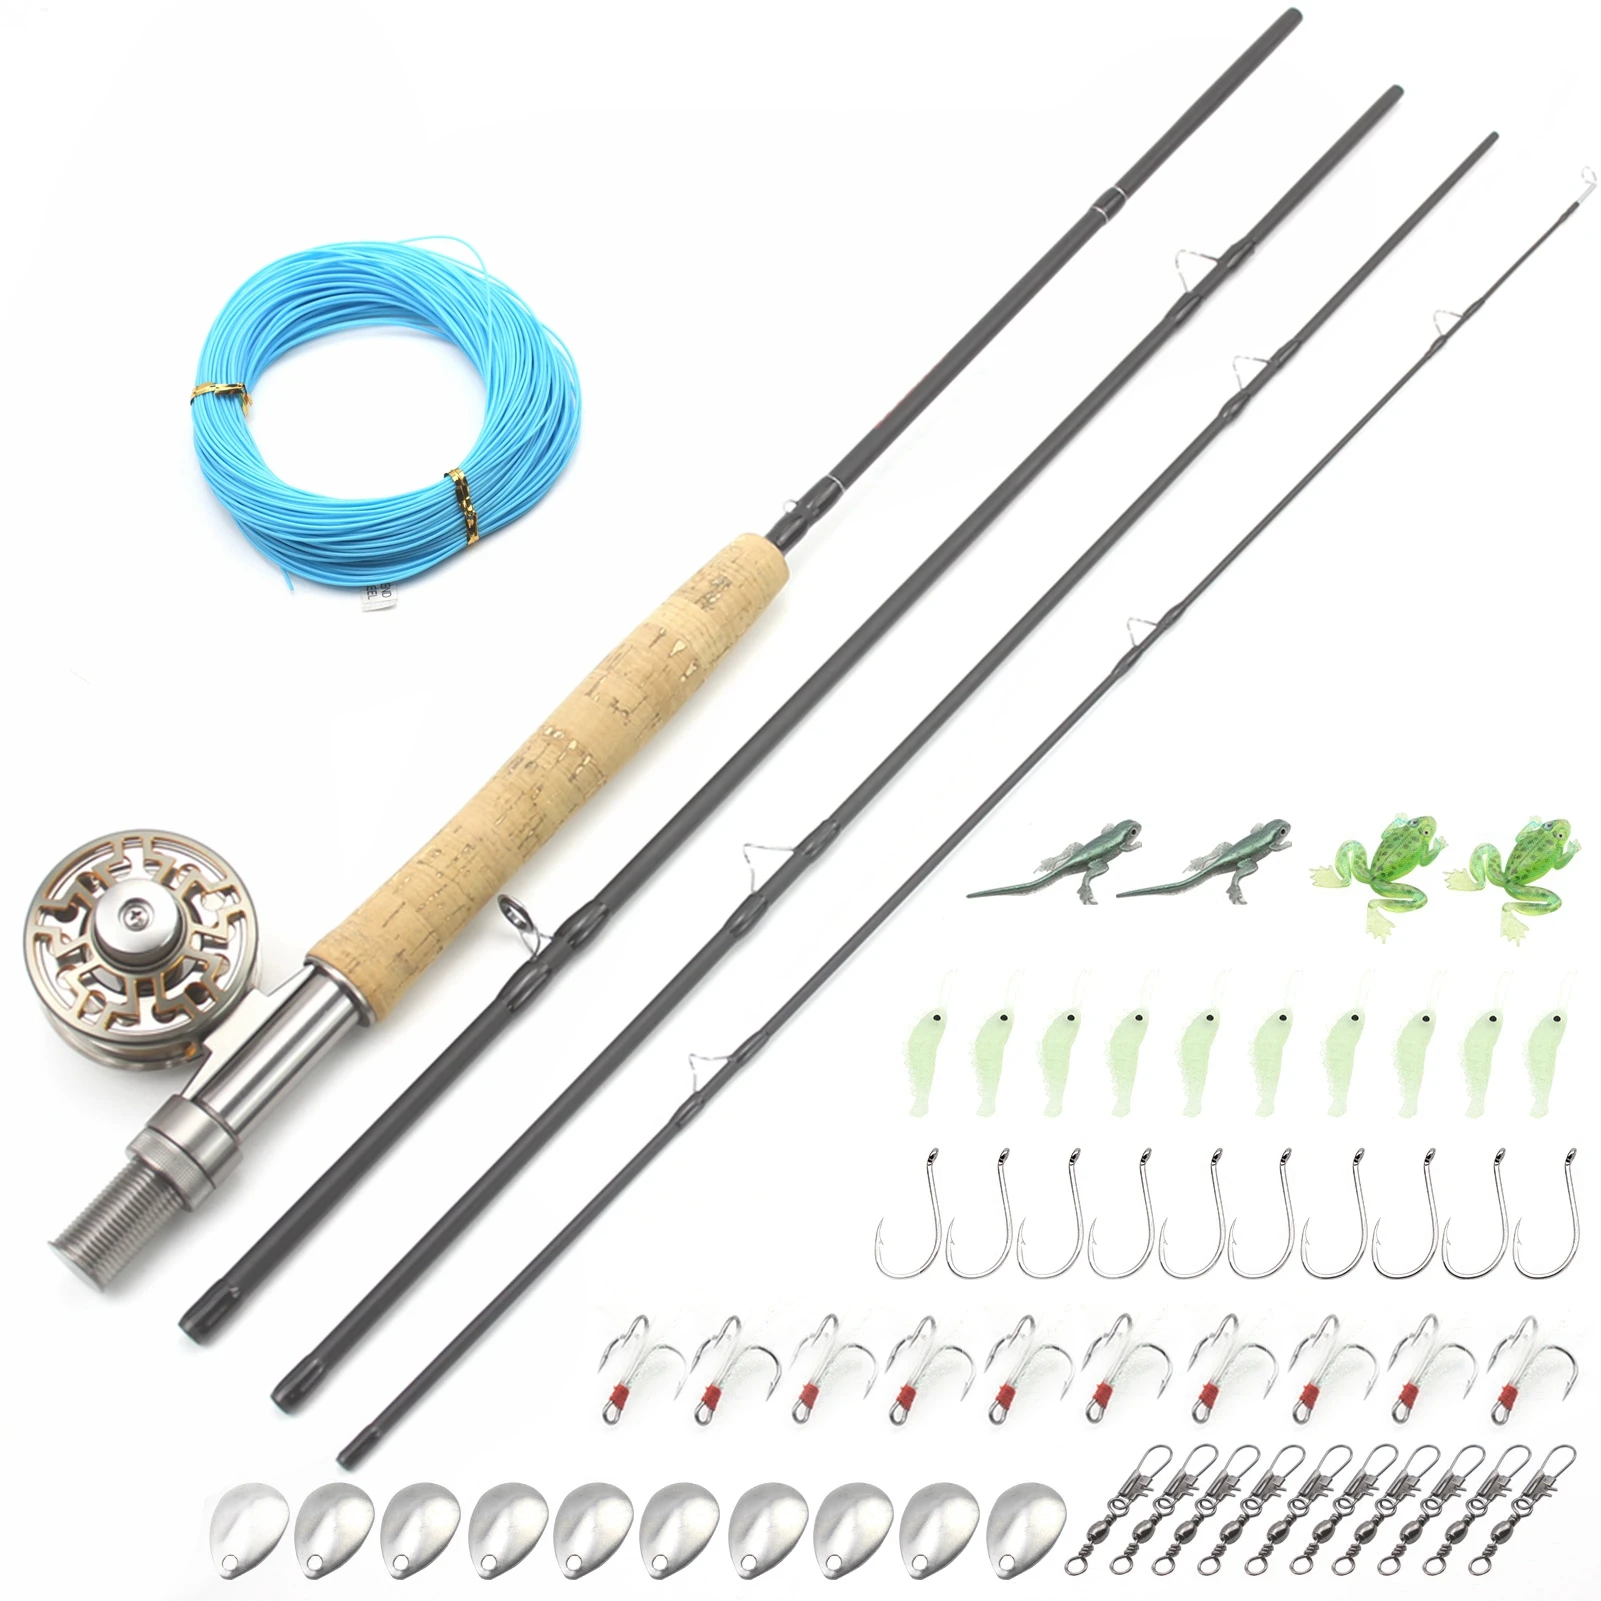 6.6Ft 7Ft Low Price Fly Fishing Rod Reel Combos Carbon Fiber 4 Section  Light Fishing Rod Beginner Fly Fishing Fishing Tackle